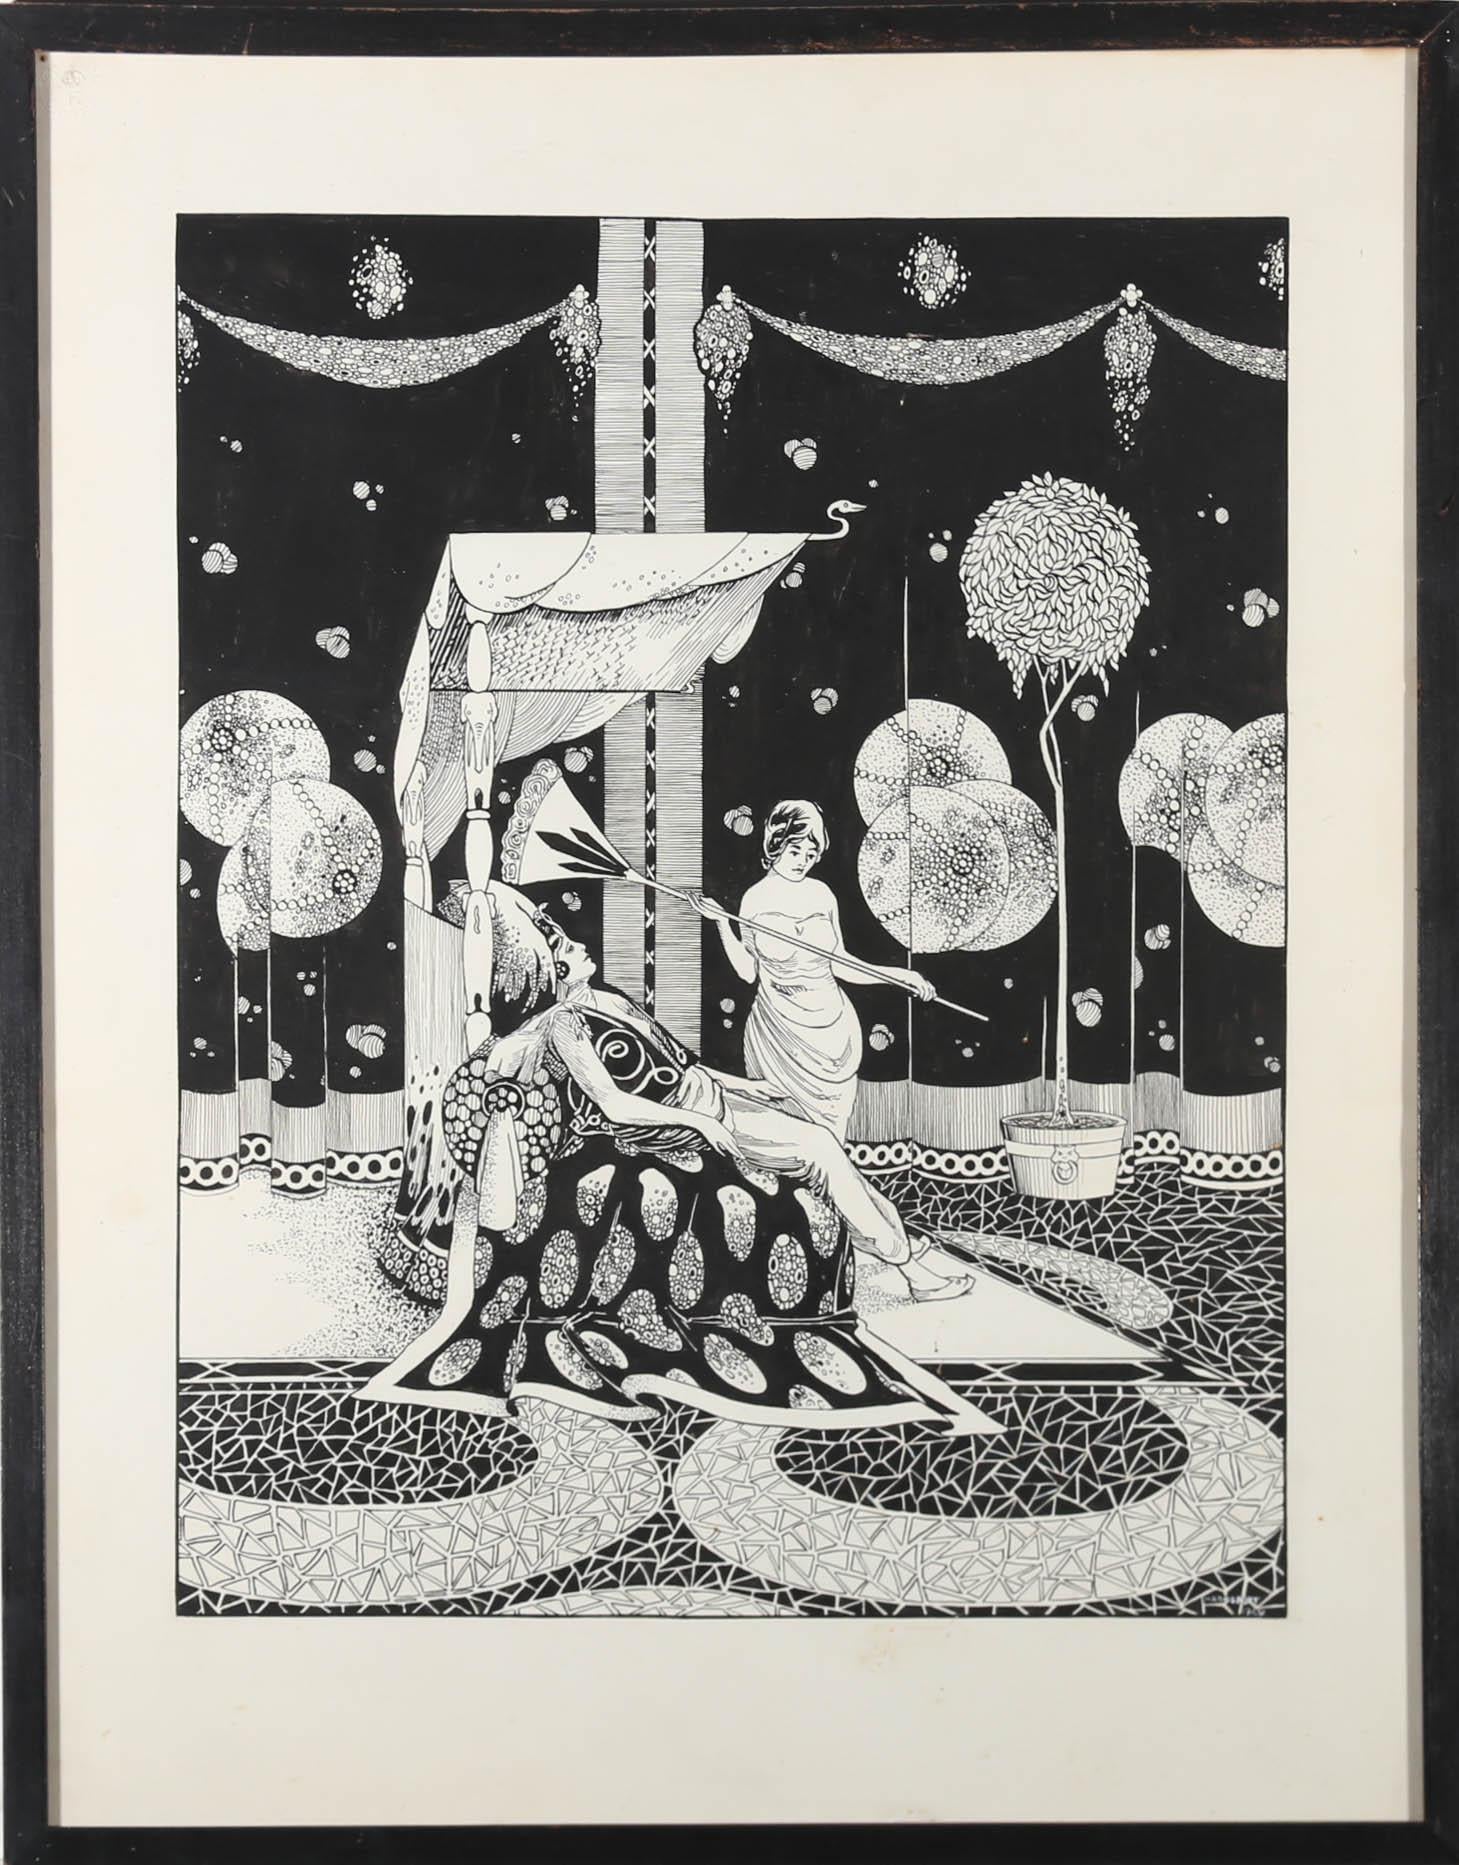 A striking pen and ink illustration of a regal queen being fanned by an attendant in an exotic interiorlandscape. Well-presented in a complimenting contemporary frame. Signed and dated. With blind stamp in the upper left corner. On paper.
